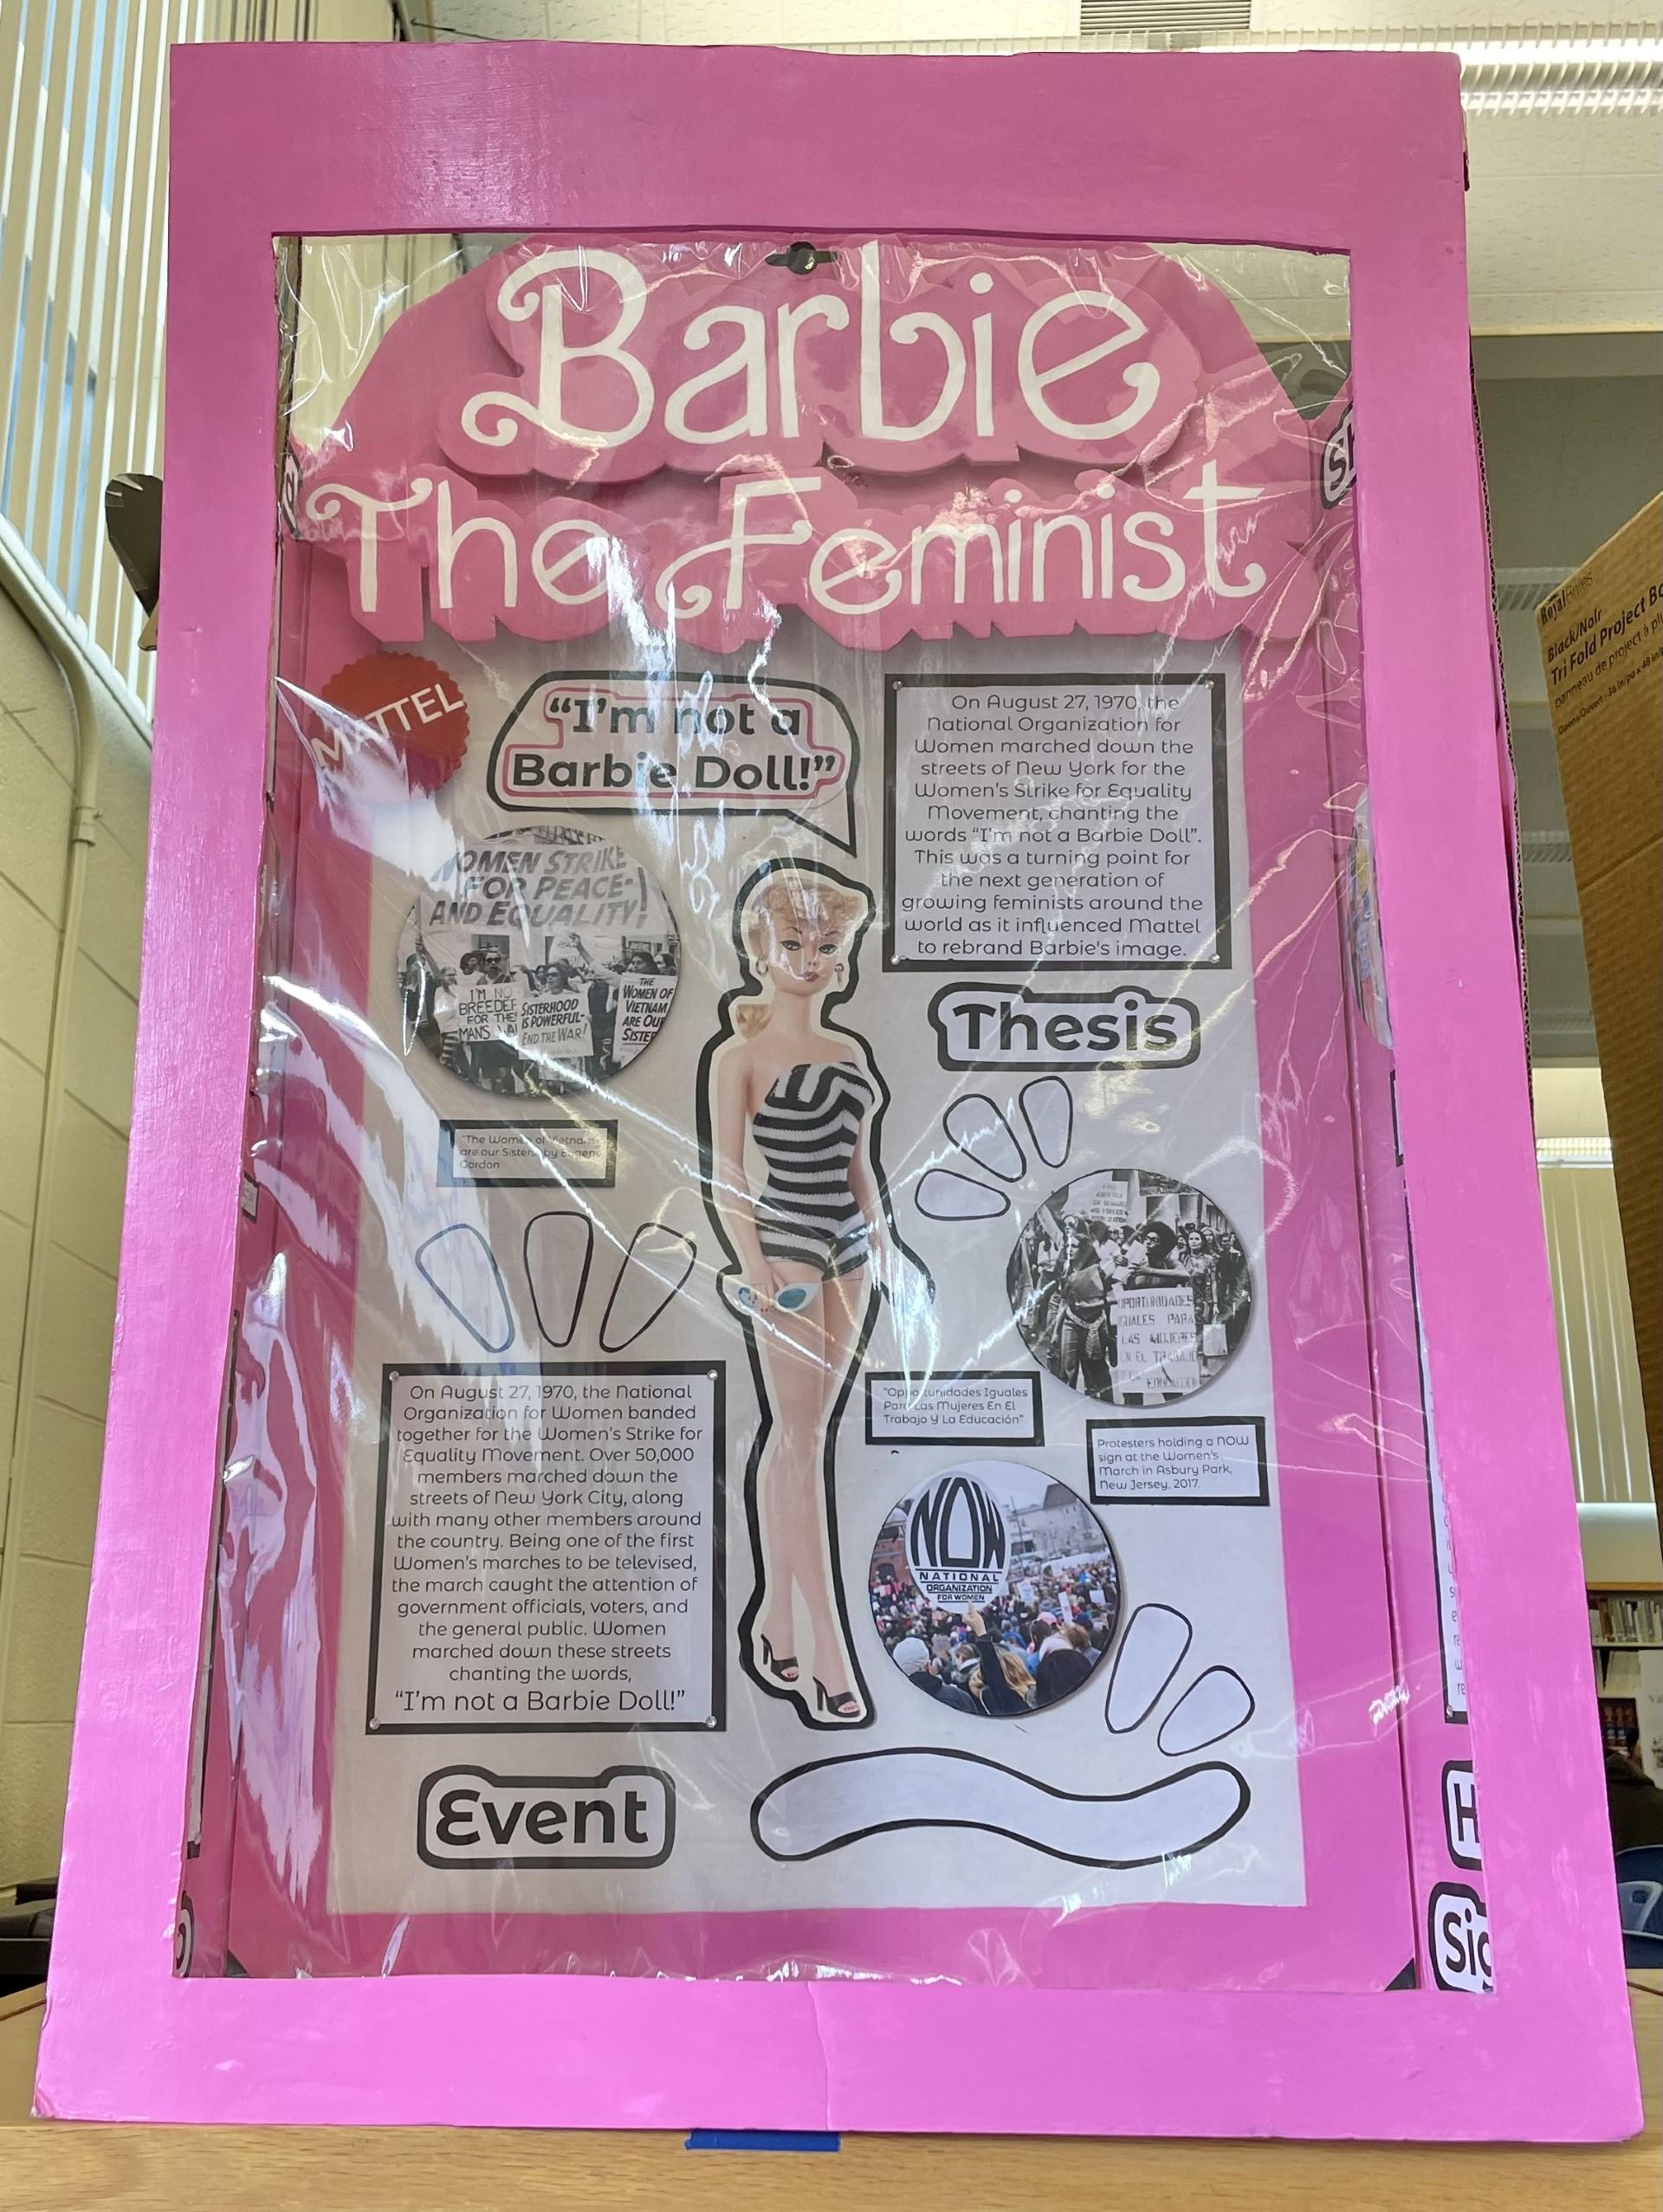 Group Exhibit: "Barbie the Feminist" by Juliana Zoe May and Erica Songco